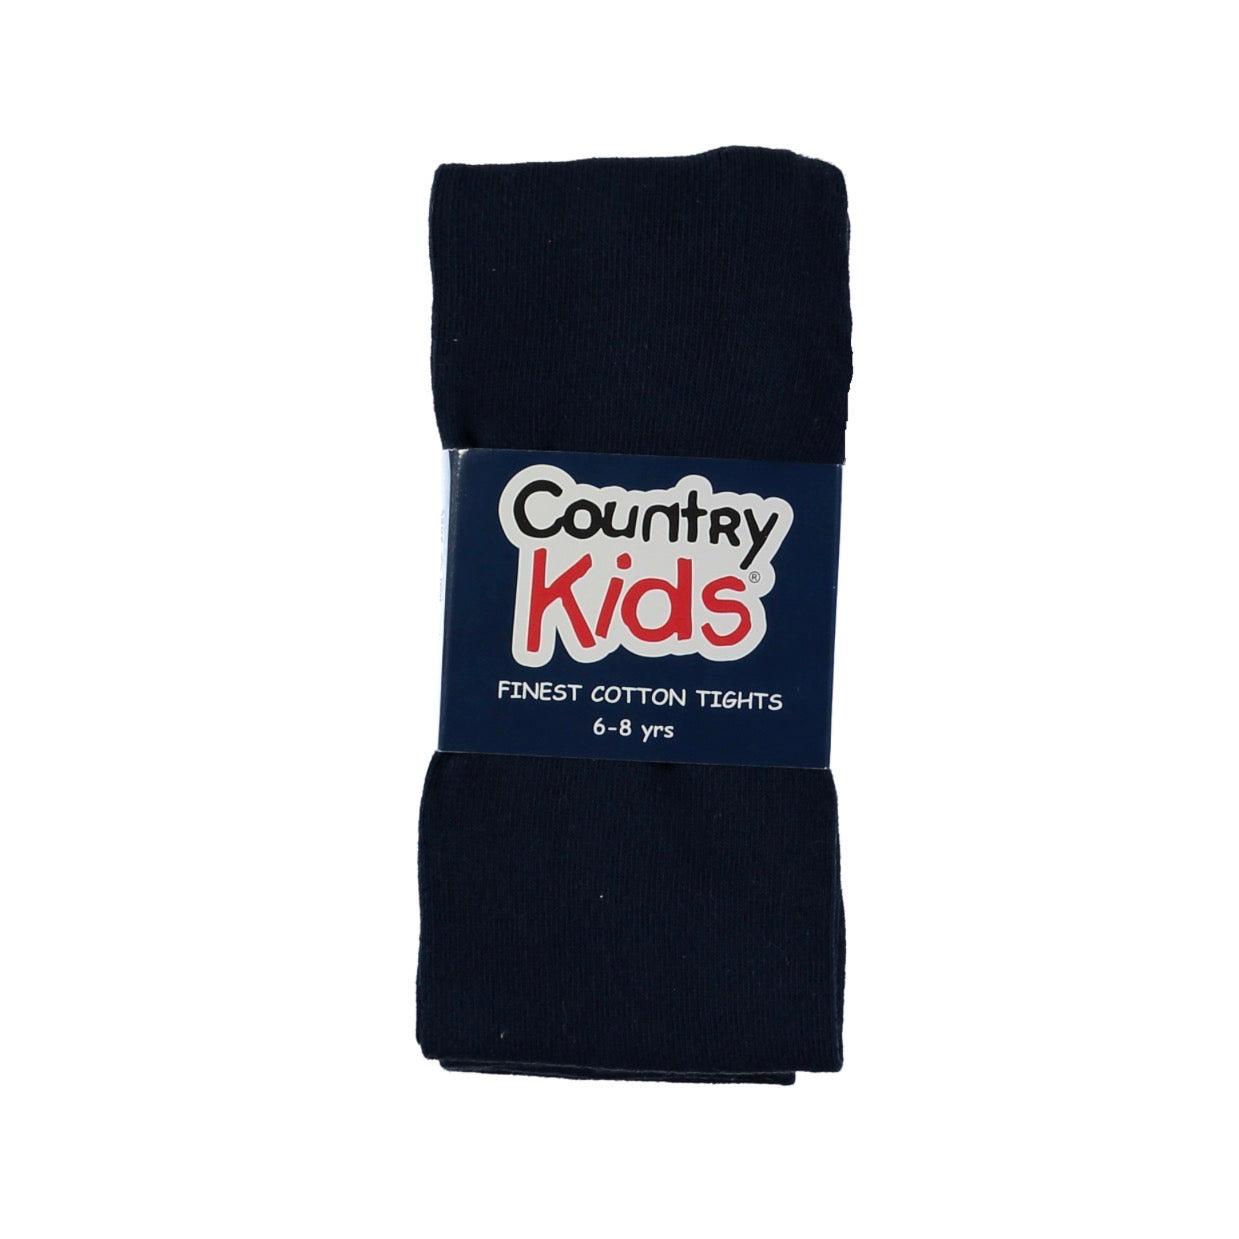 Country Kids Plain Tights Navy Clothing 1-3YRS / Navy,3-5YRS / Navy,6-8YRS / Navy,9-11YRS / Navy,12-15YRS / Navy